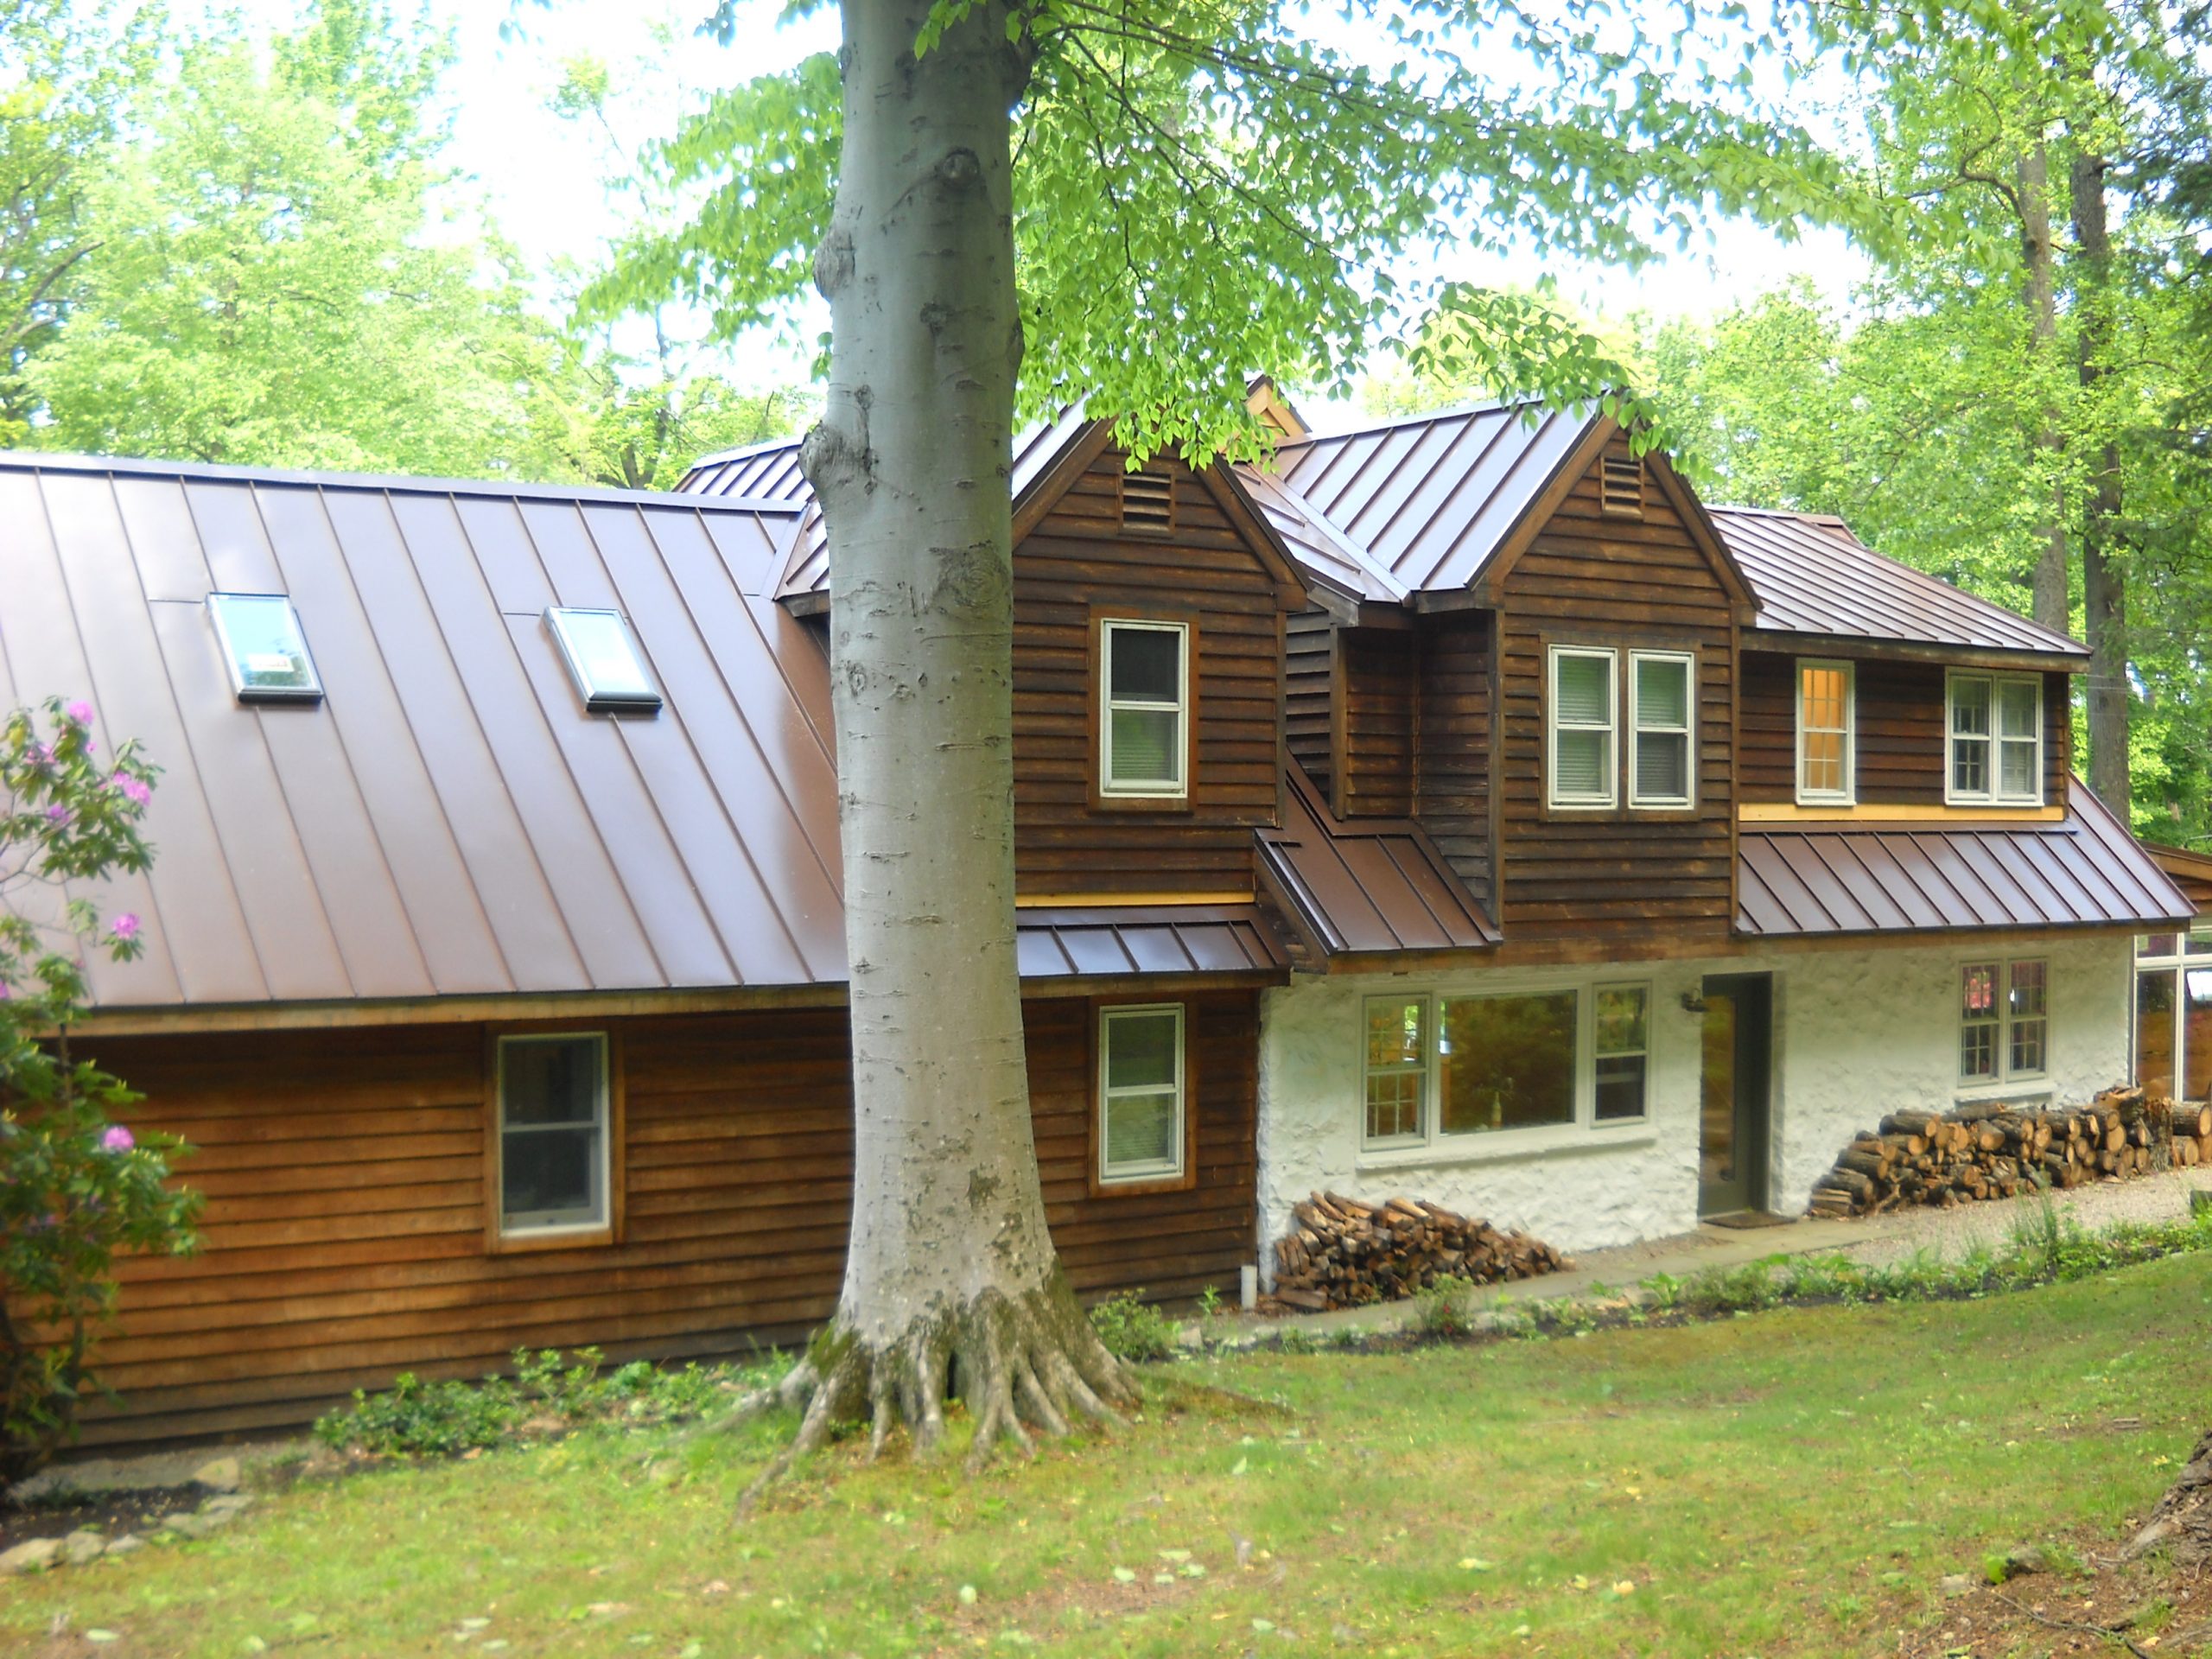 Home with wooden siding in a forest area